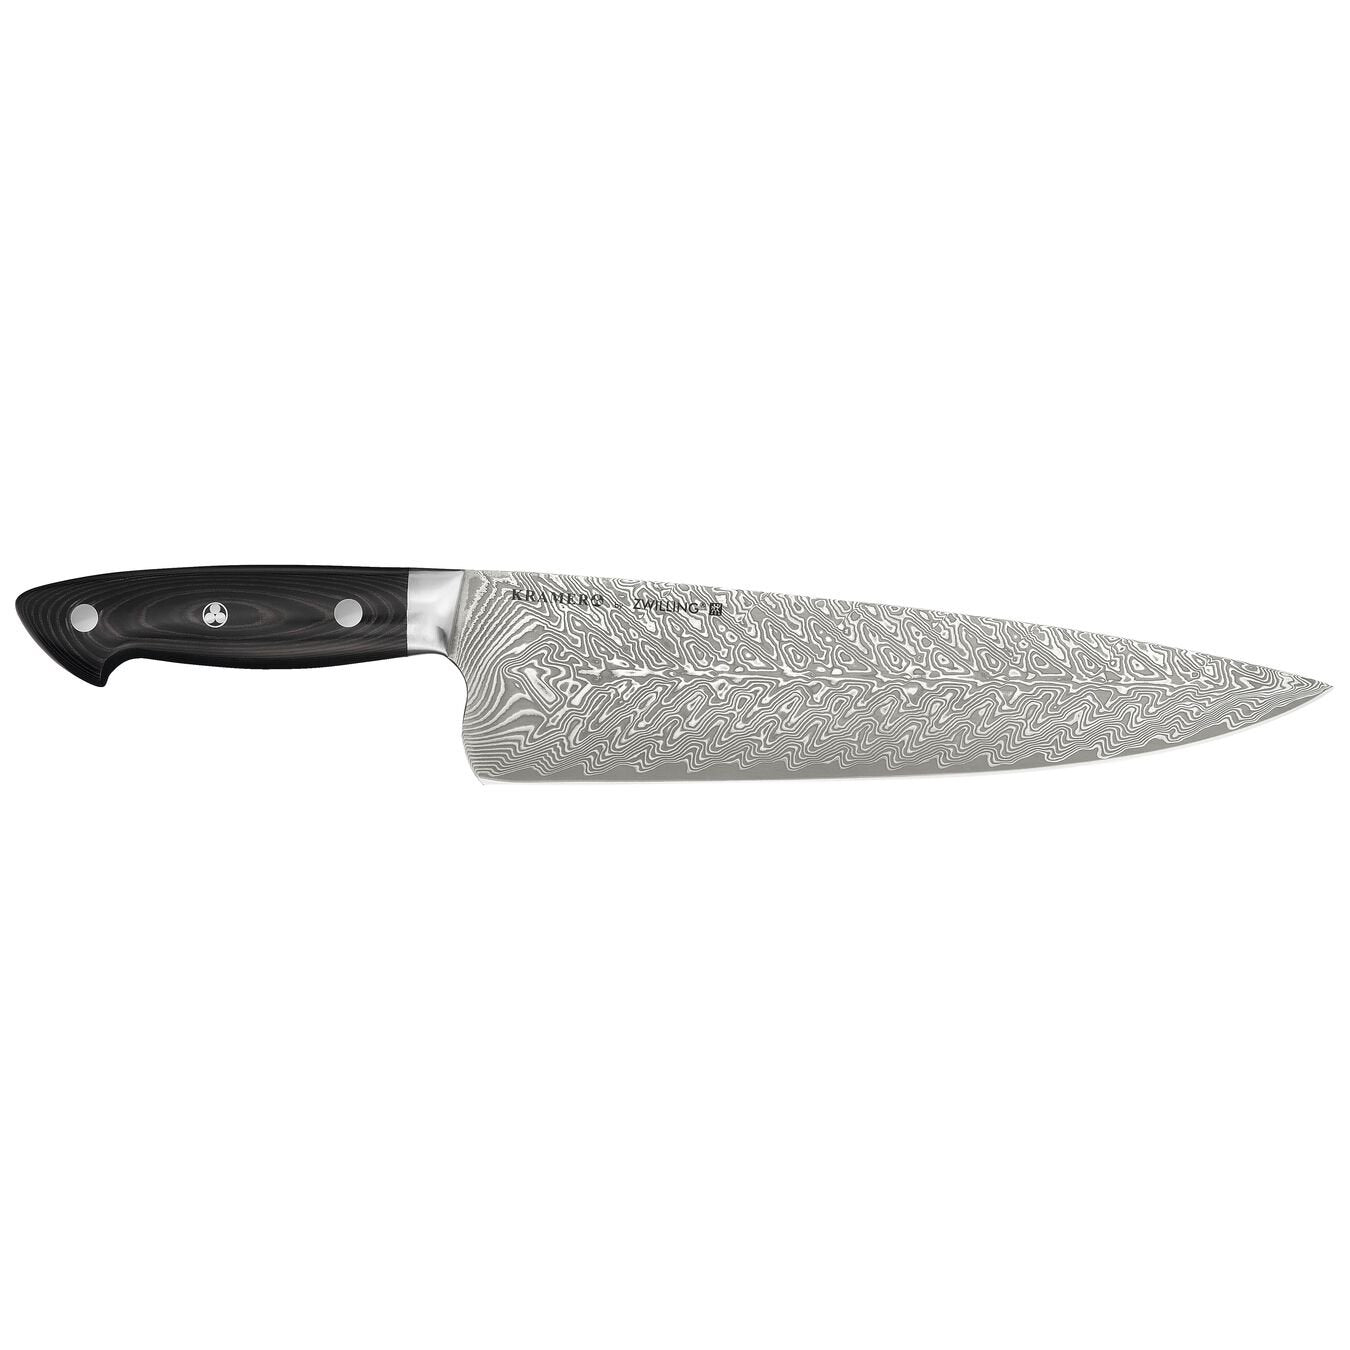 Kramer by Zwilling Euroline Damascus Collection Chef's Knife 10in